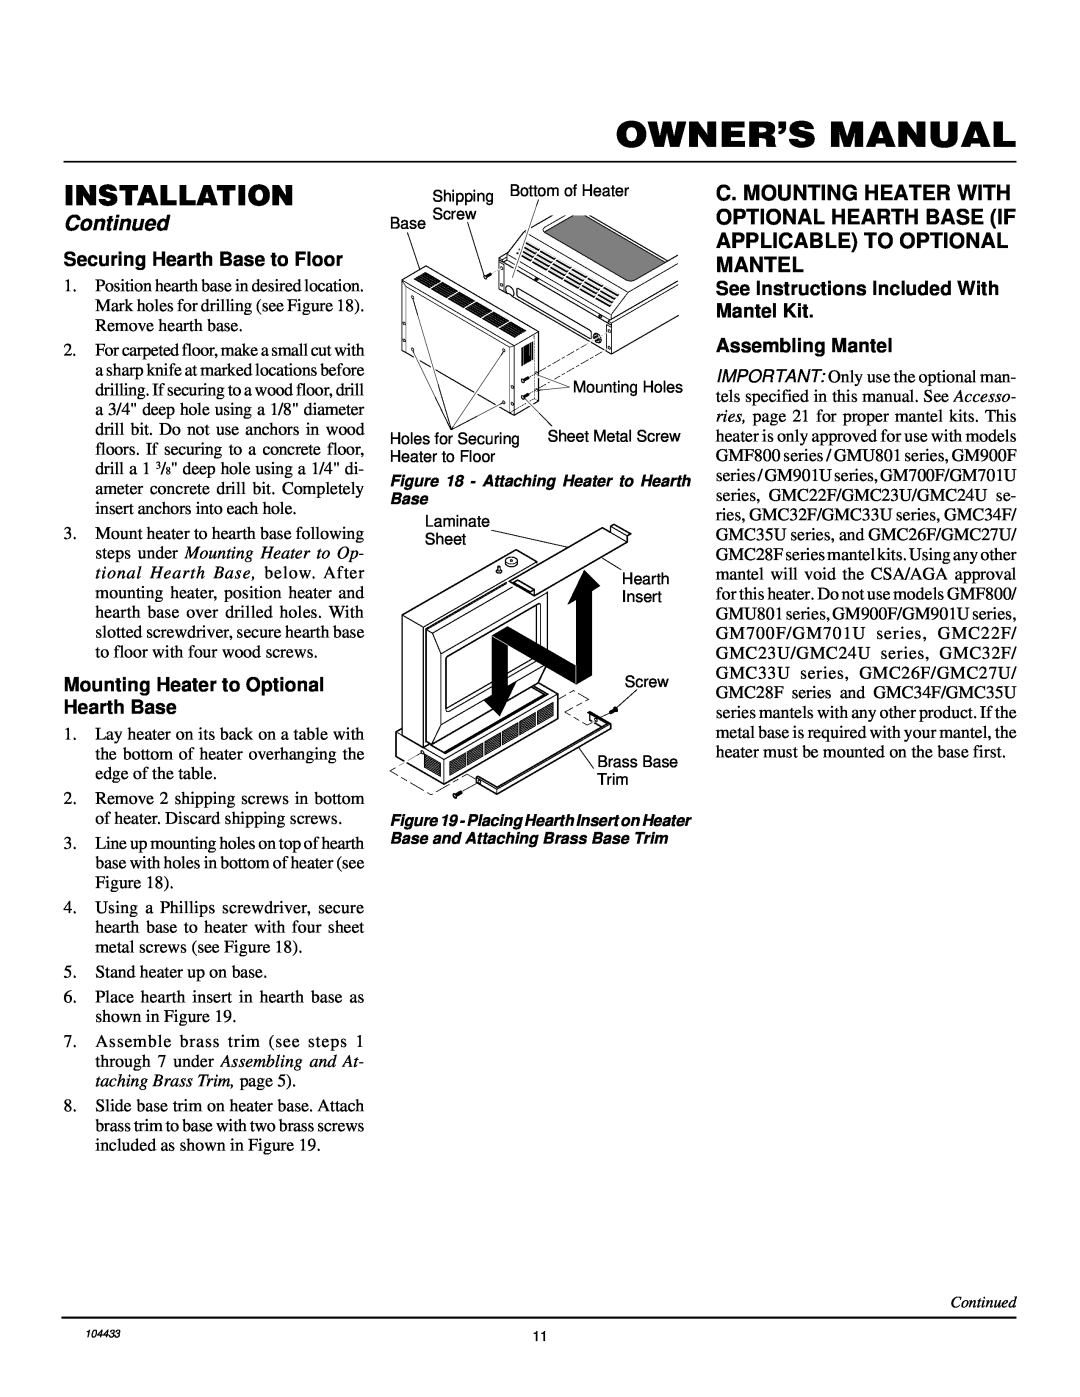 Desa RFN30T Securing Hearth Base to Floor, Mounting Heater to Optional Hearth Base, Assembling Mantel, Installation 